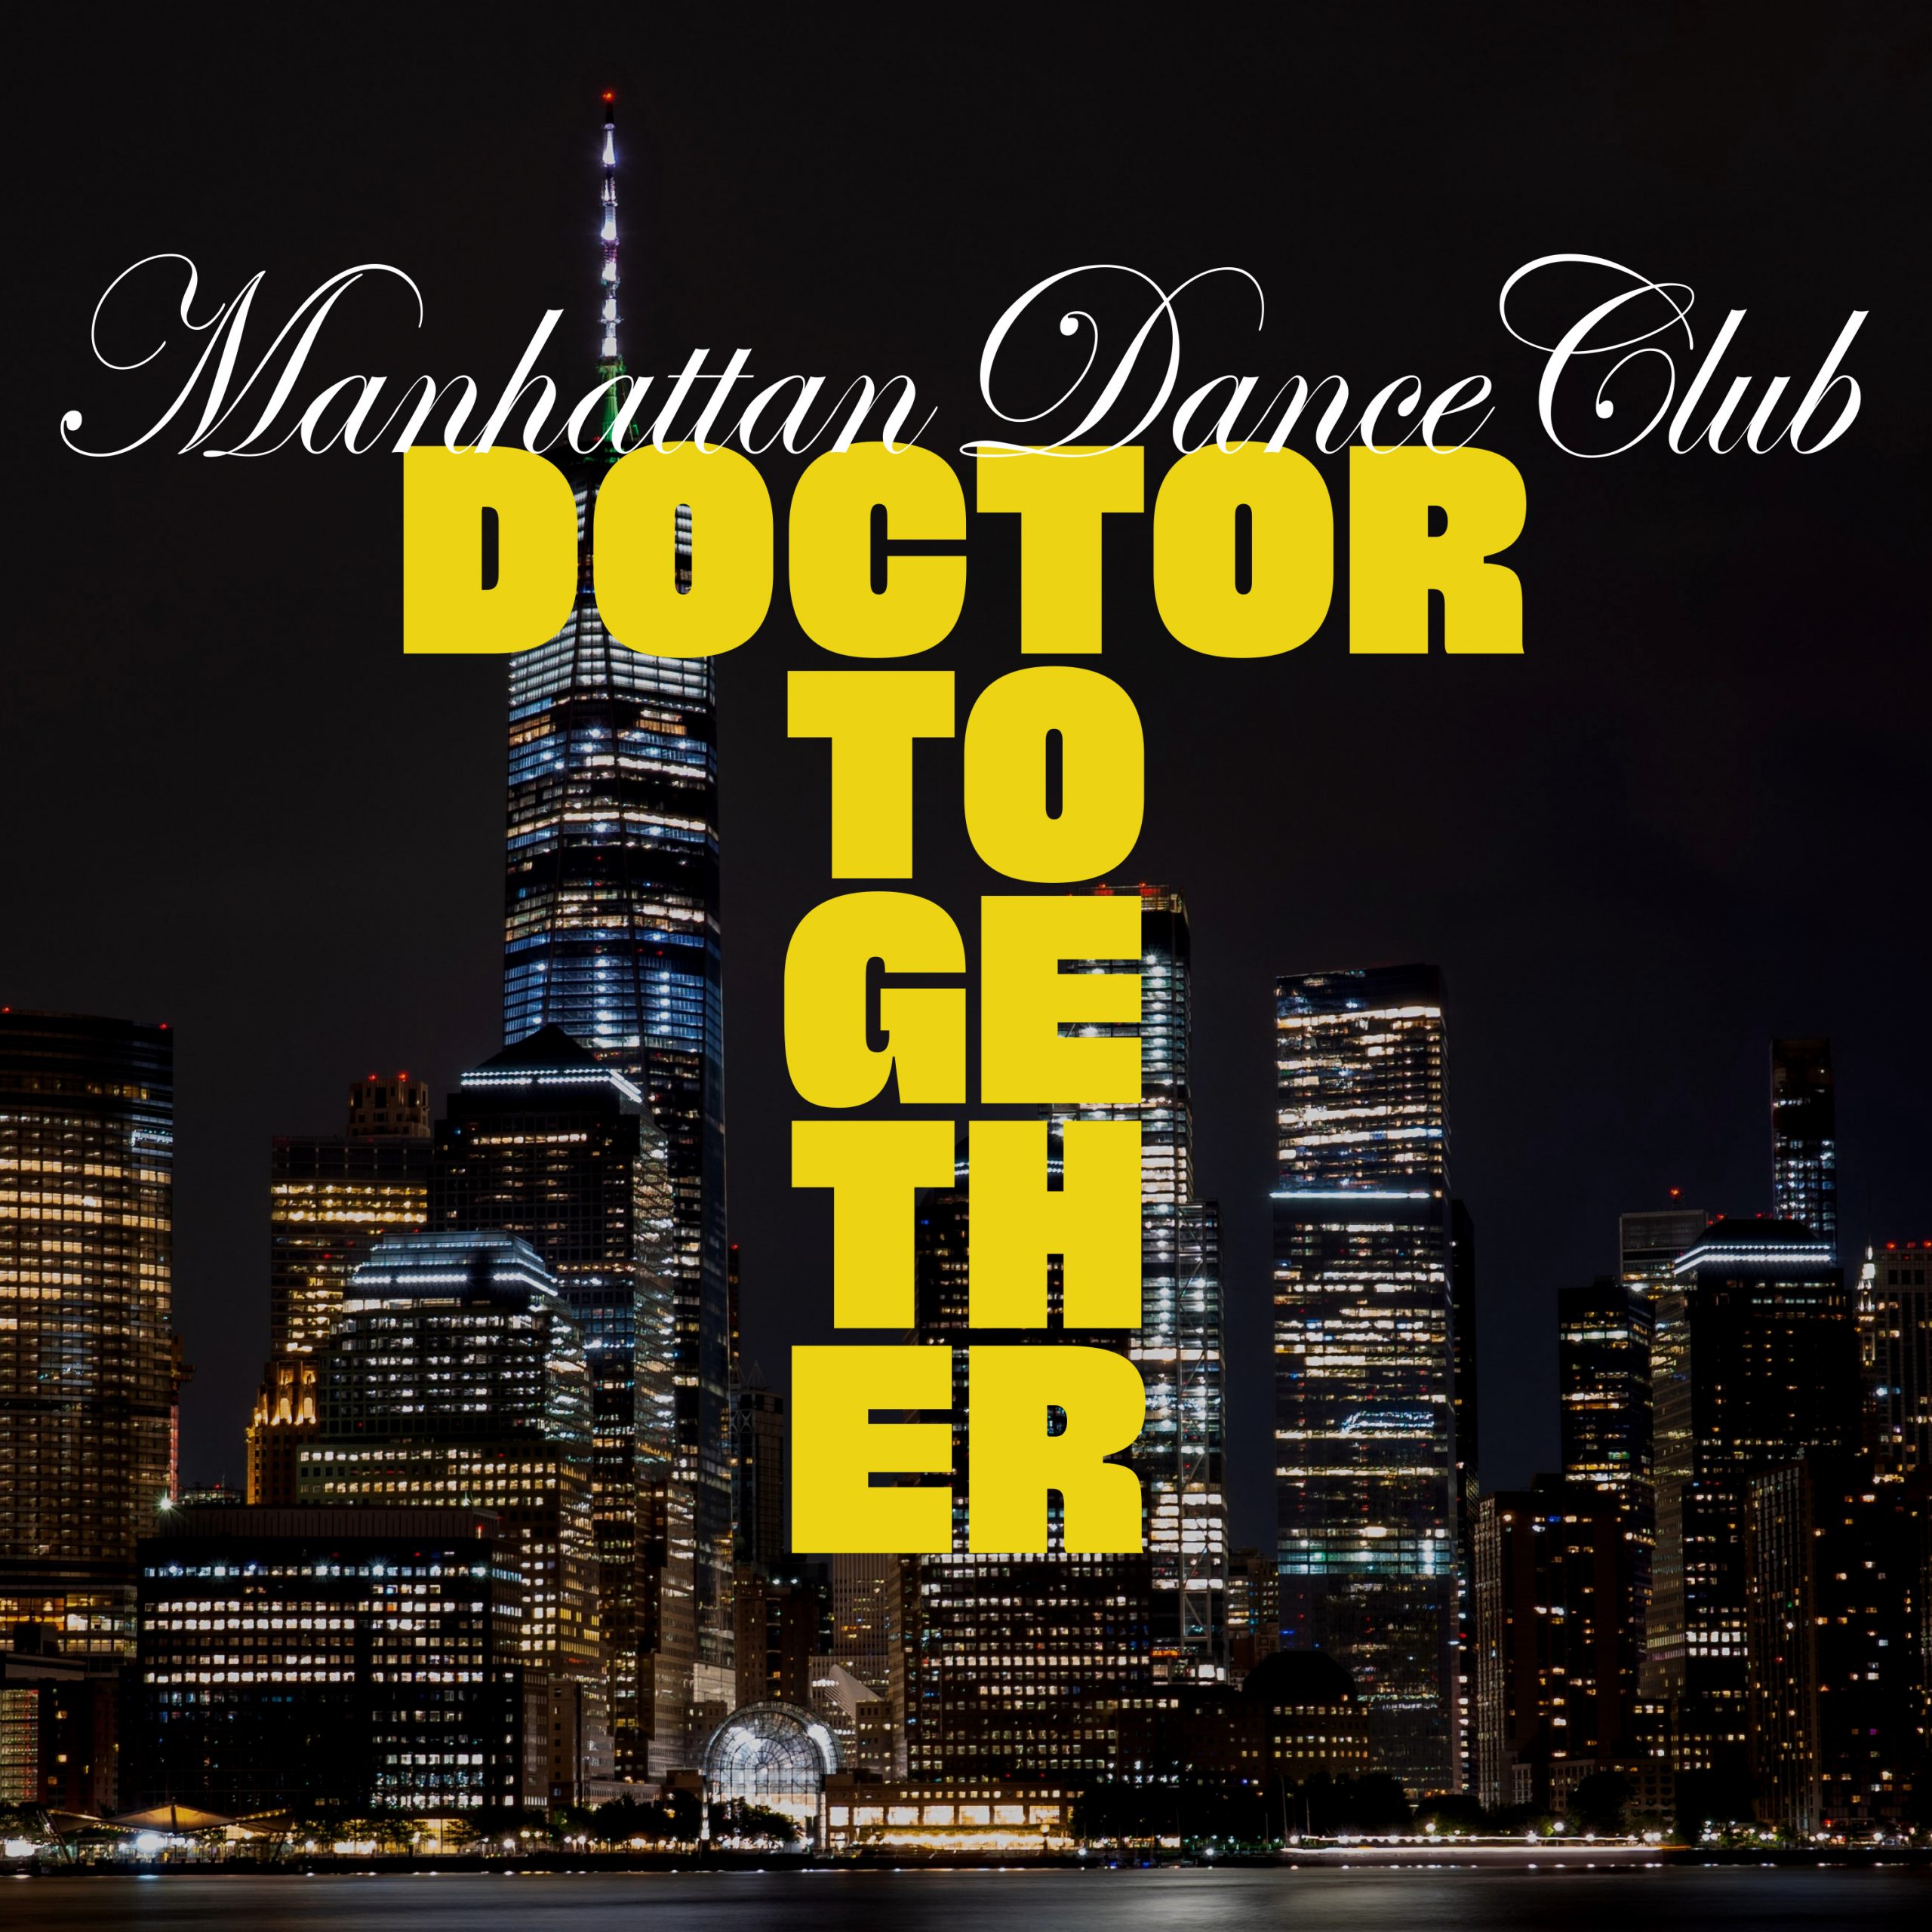 The new single ‘Manhattan Dance Club’ from ‘Doctor Together’ with it’s hands in the air dance production is on the playlist now.